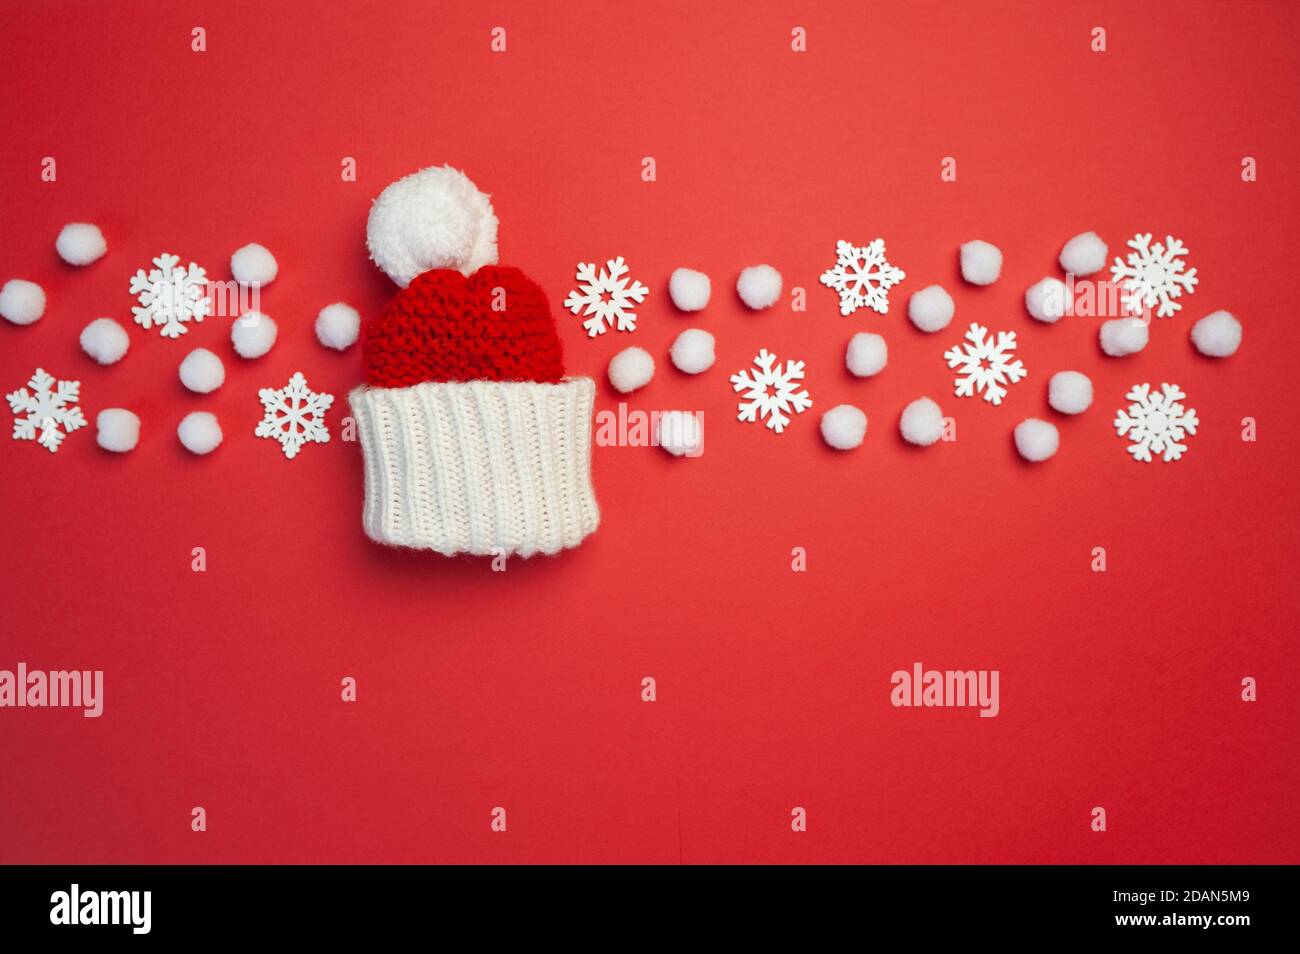 Christmas greeting card with red hat and snowflakes on red backgroun. Xmas holiday postcard with place for your text. Happy New Year Stock Photo